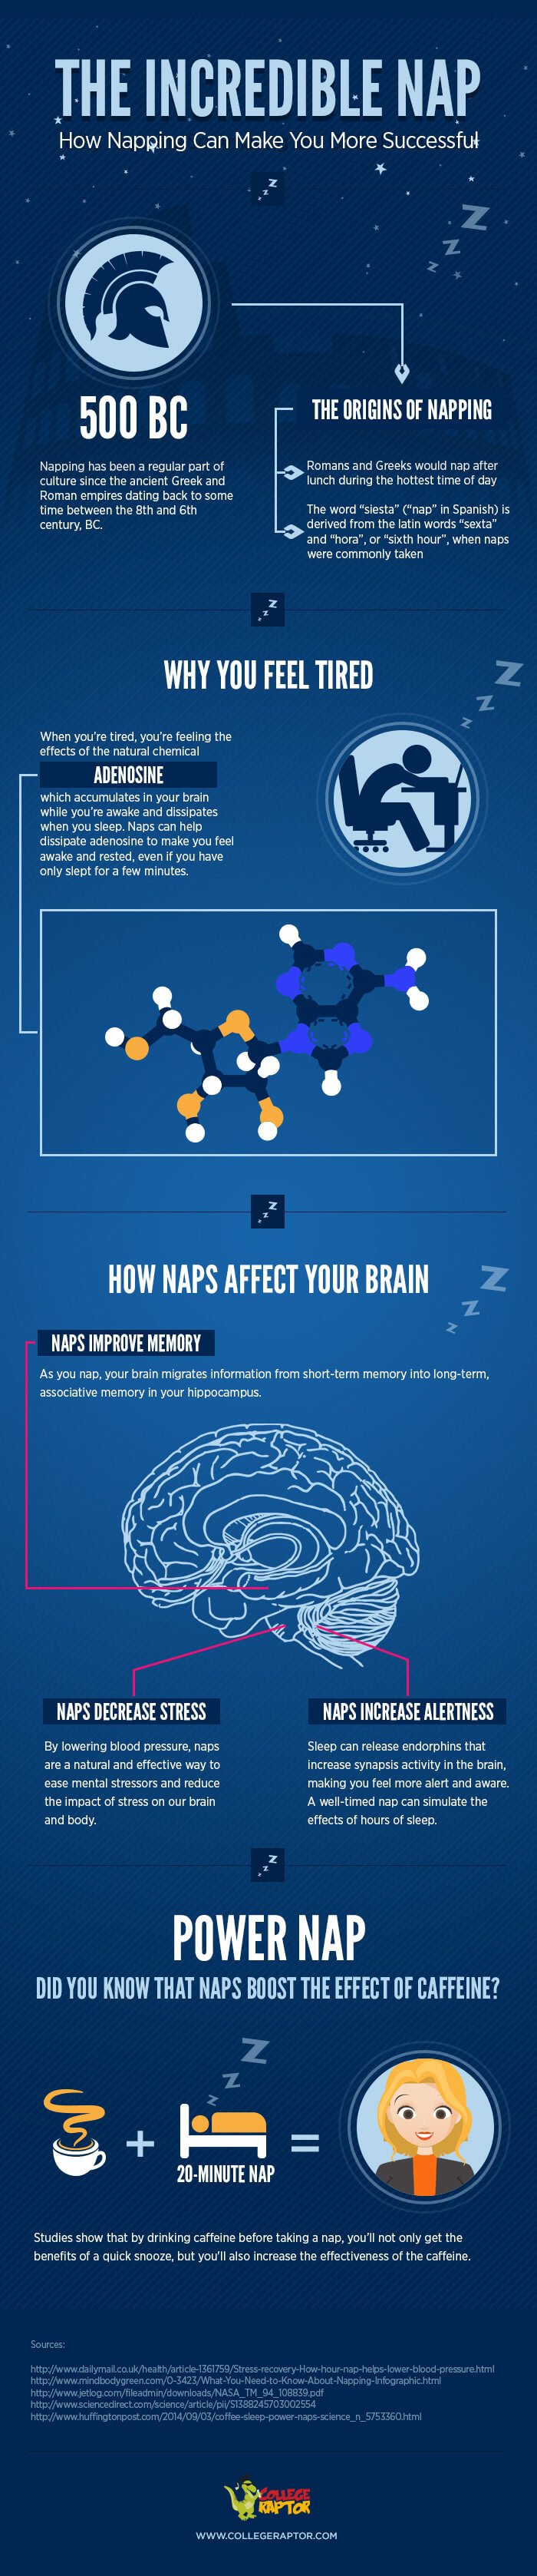 Here's more information on why you should be taking naps